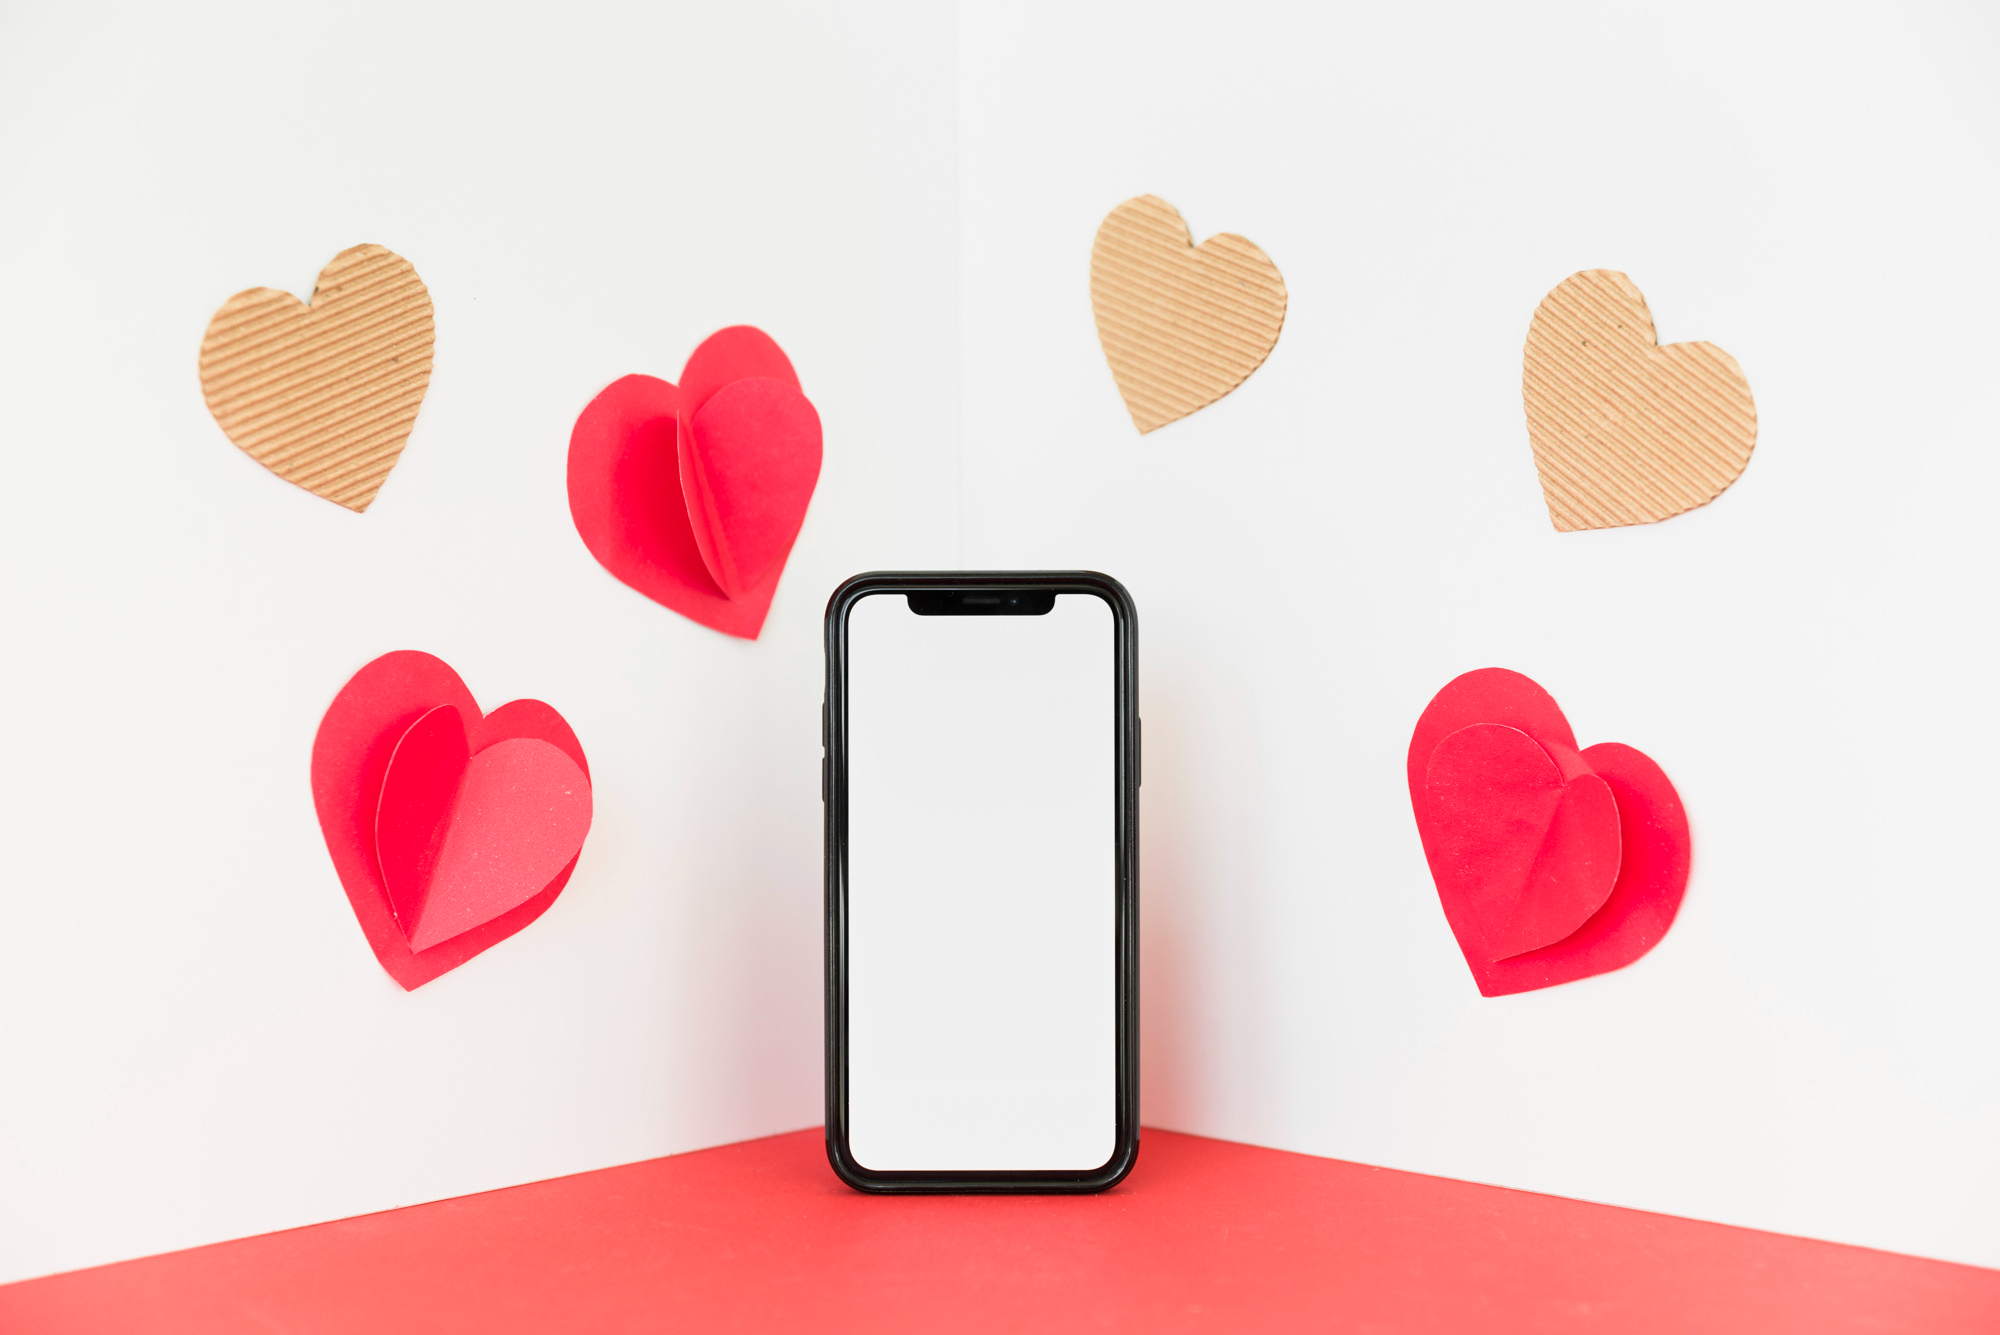 Smartphone surrounded by heart-shaped cutouts. This is a blog banner for a blog talking about app retargeting strategies for valentine's day.